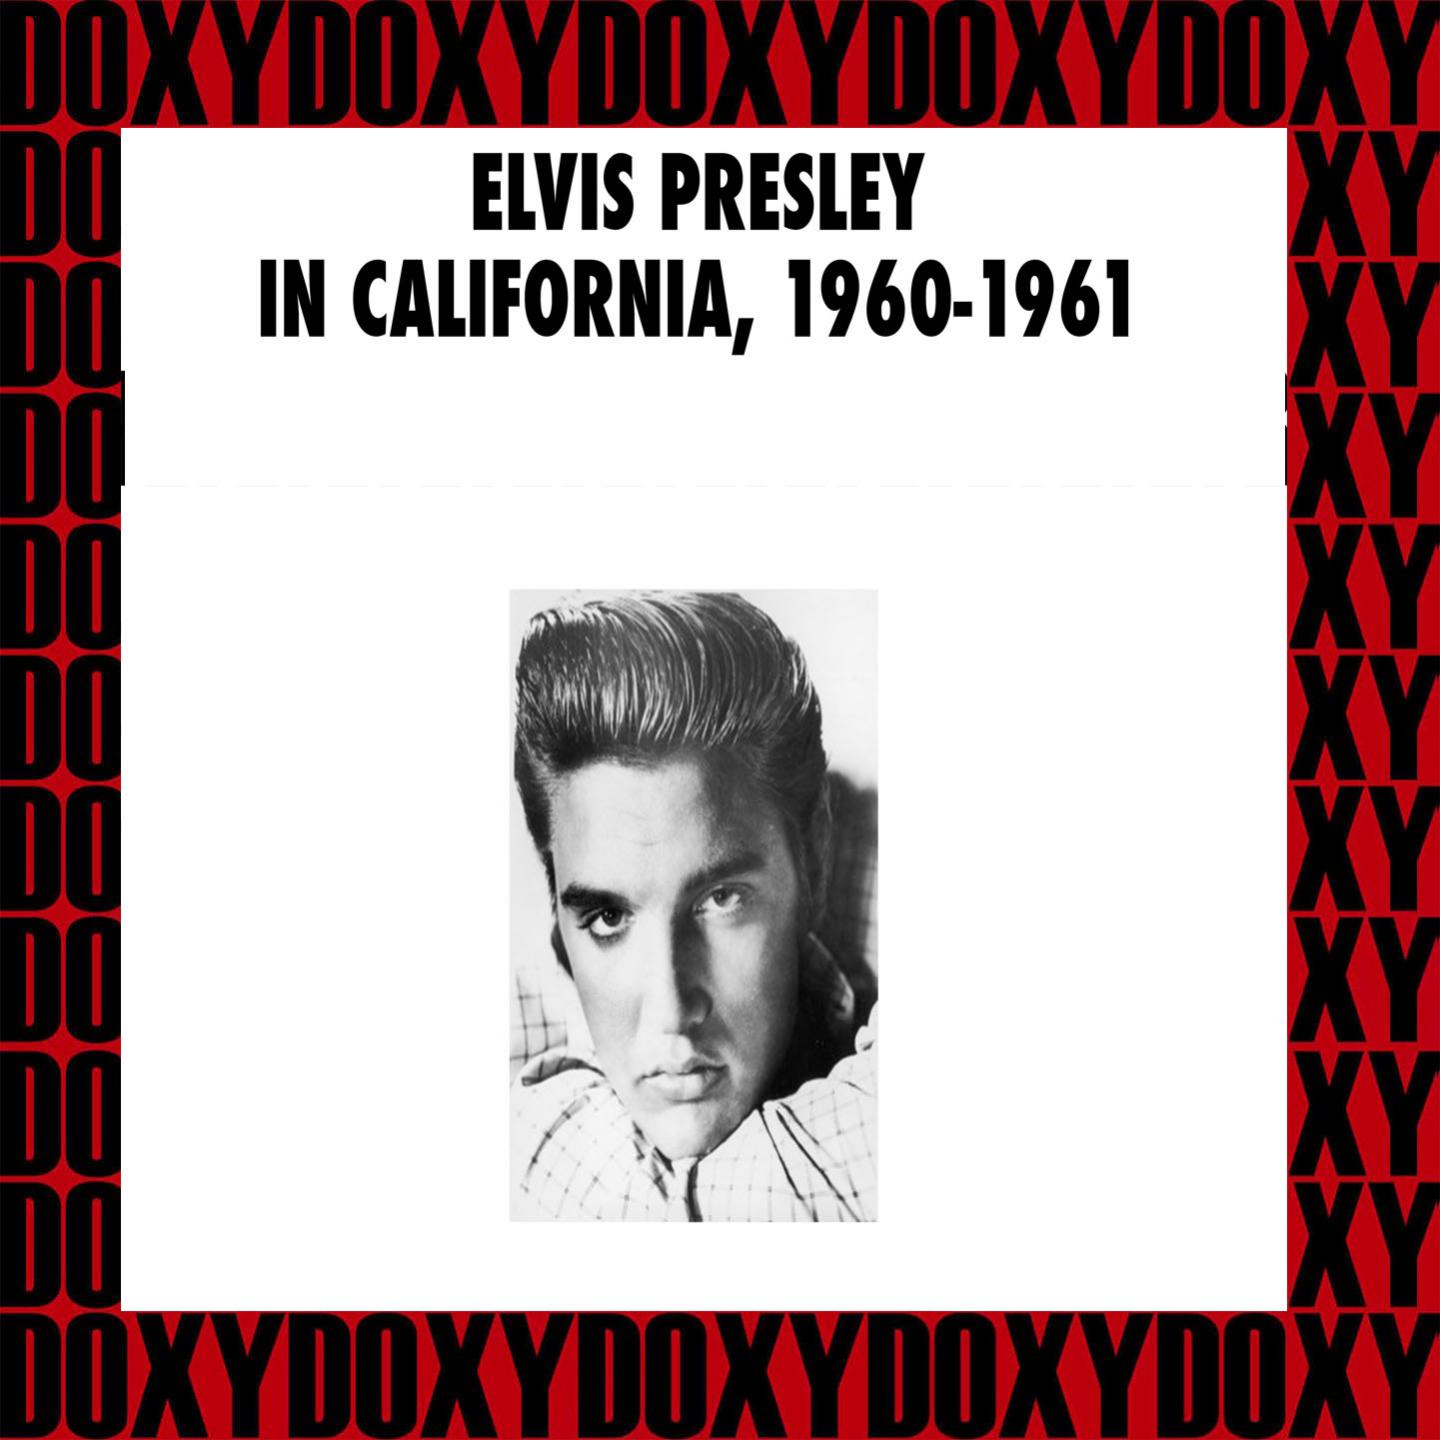 In California, Outtakes & Studio Rarities, 1960-1961 (Hd Remastered Edition, Doxy Collection)